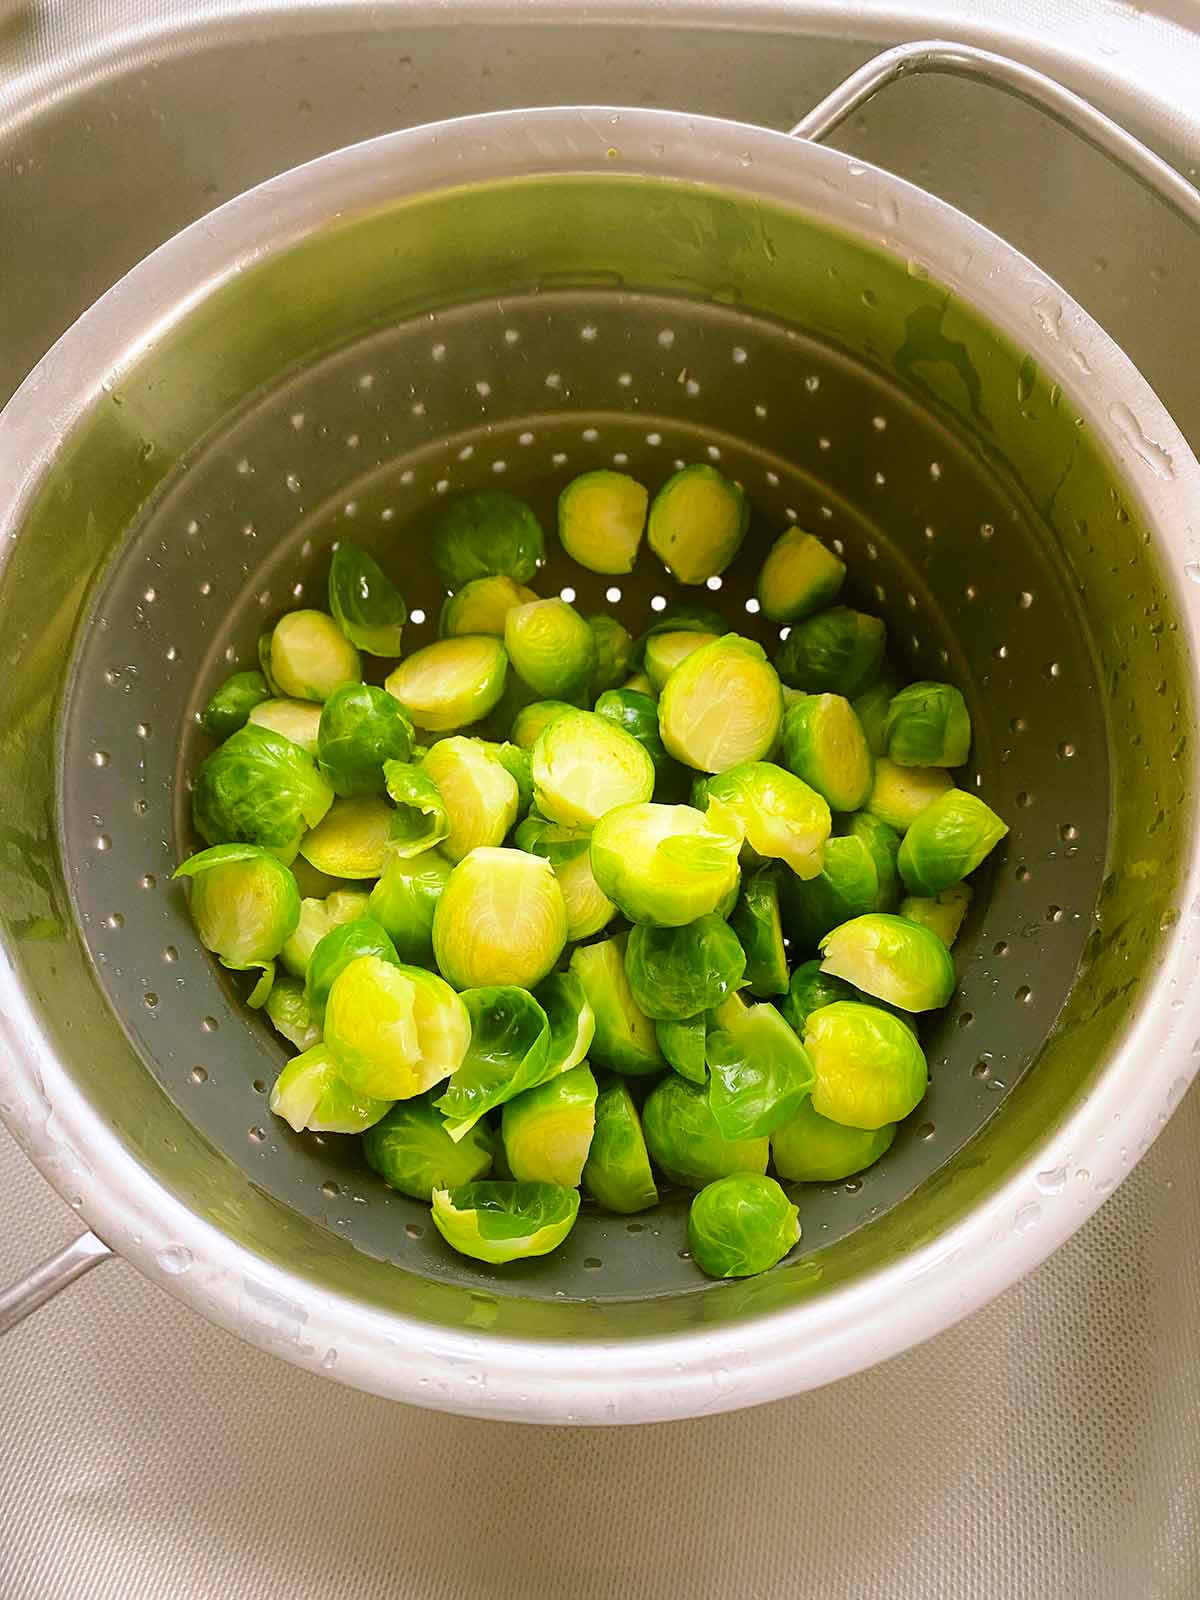 Cooked Brussels sprouts in a collander.